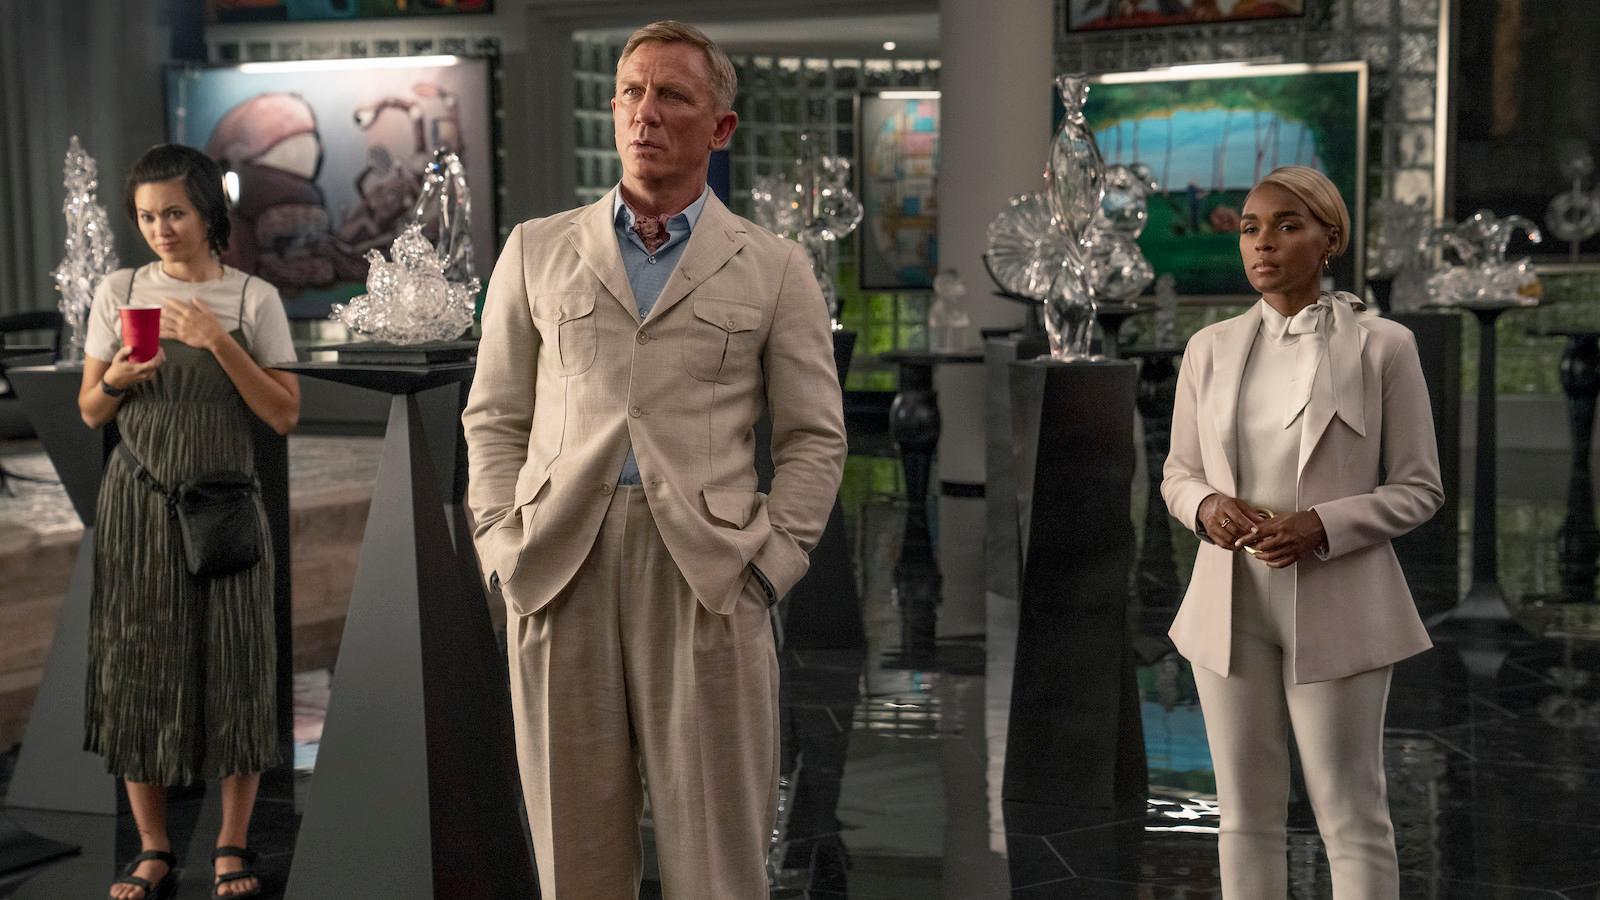 Jessica Henwick as Peg, Daniel Craig as Detective Benoit Blanc and Janelle Monáe as Andi in Glass Onion Knives Out on Netflix